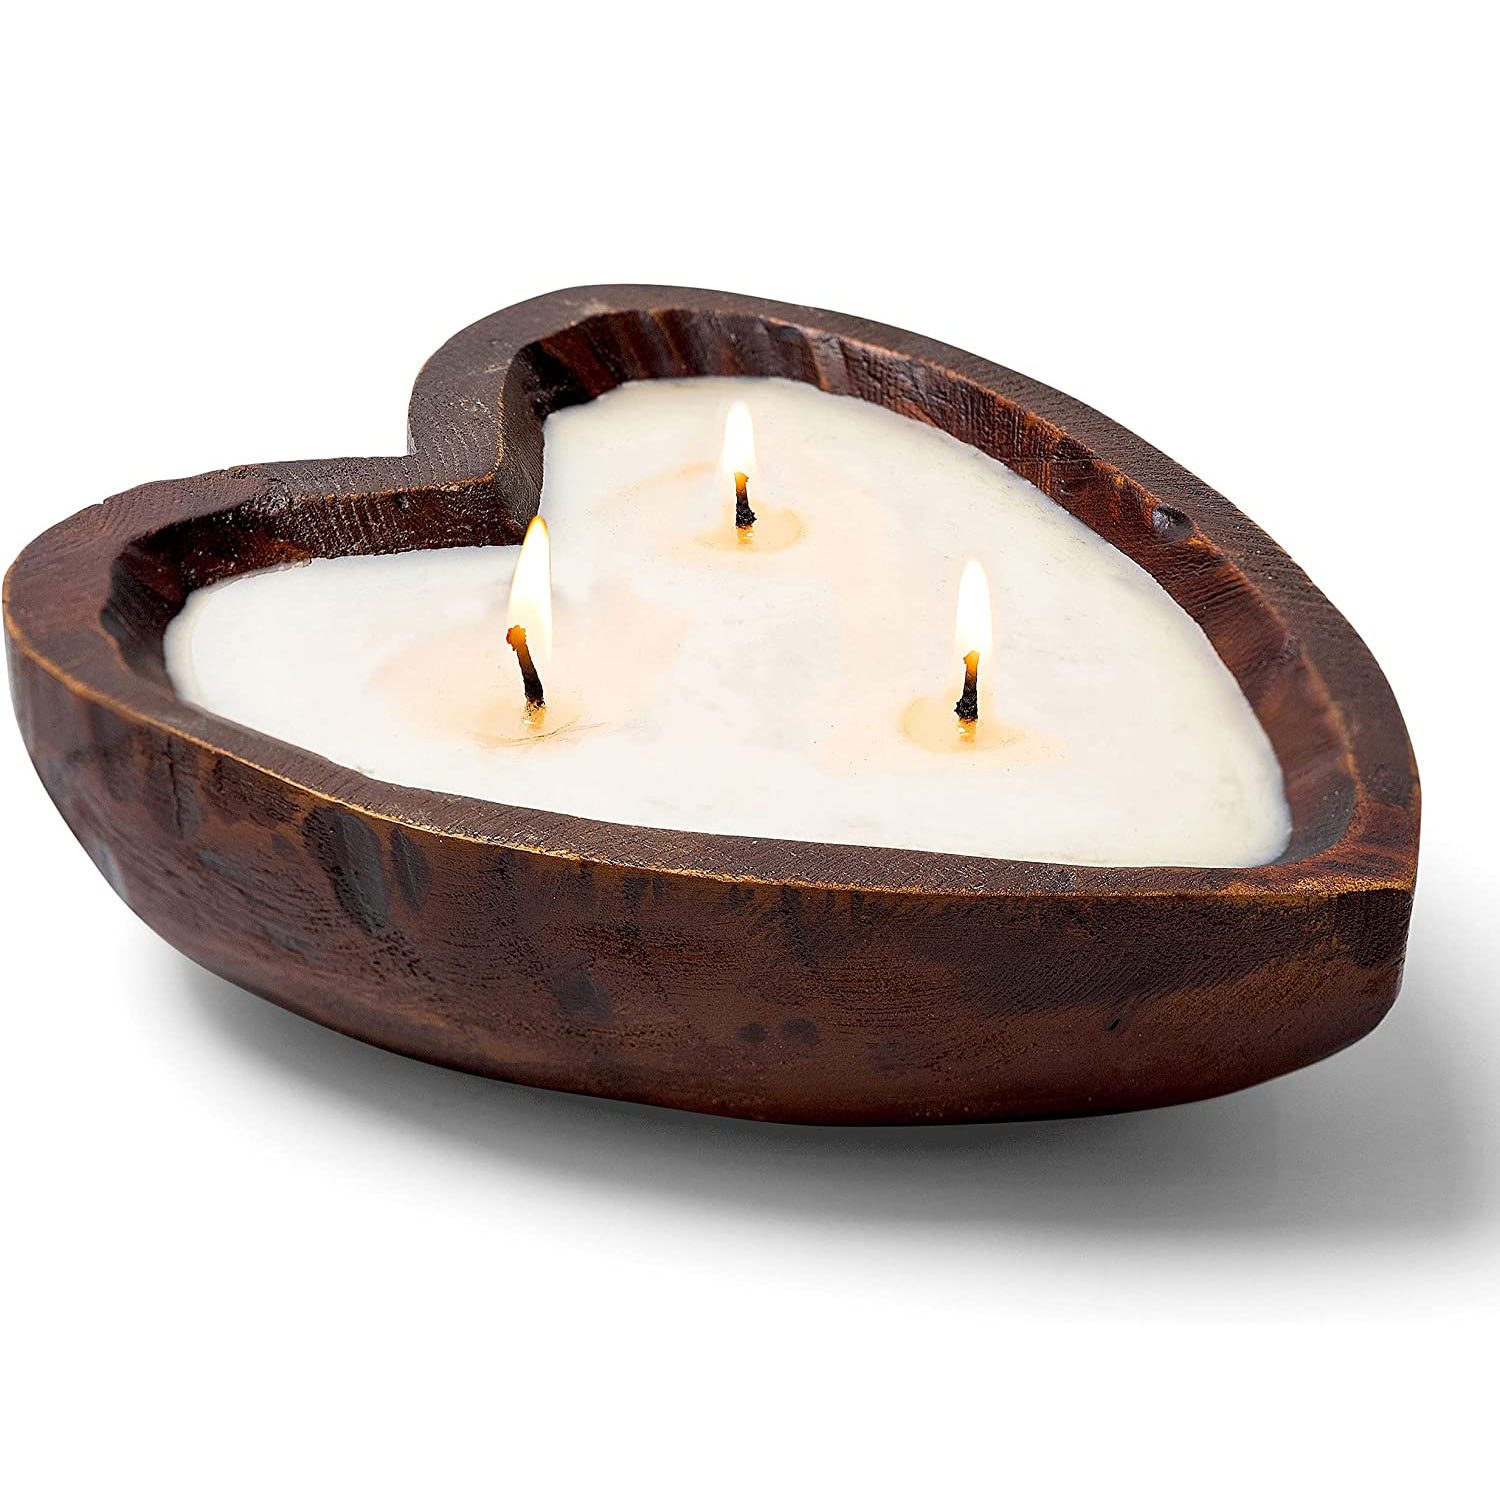 MWC-06 Heart Dough Bowl Candle | Heart Candles: Three Wick Candle in Heart Shaped Candle | White Hearts Dough Bowl Candles